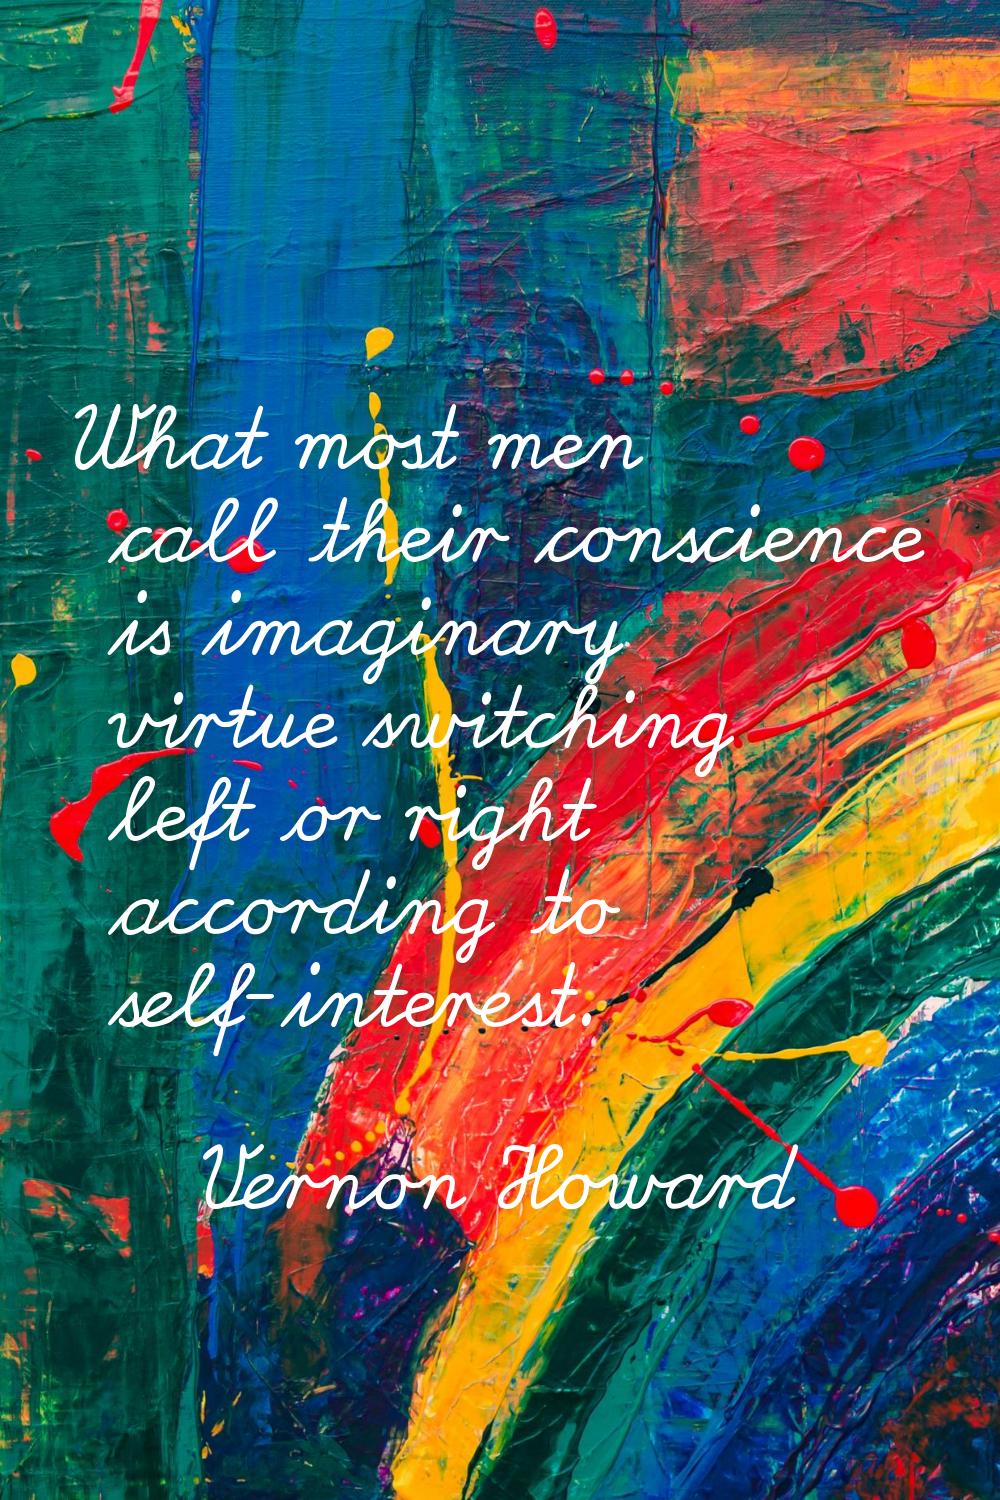 What most men call their conscience is imaginary virtue switching left or right according to self-i